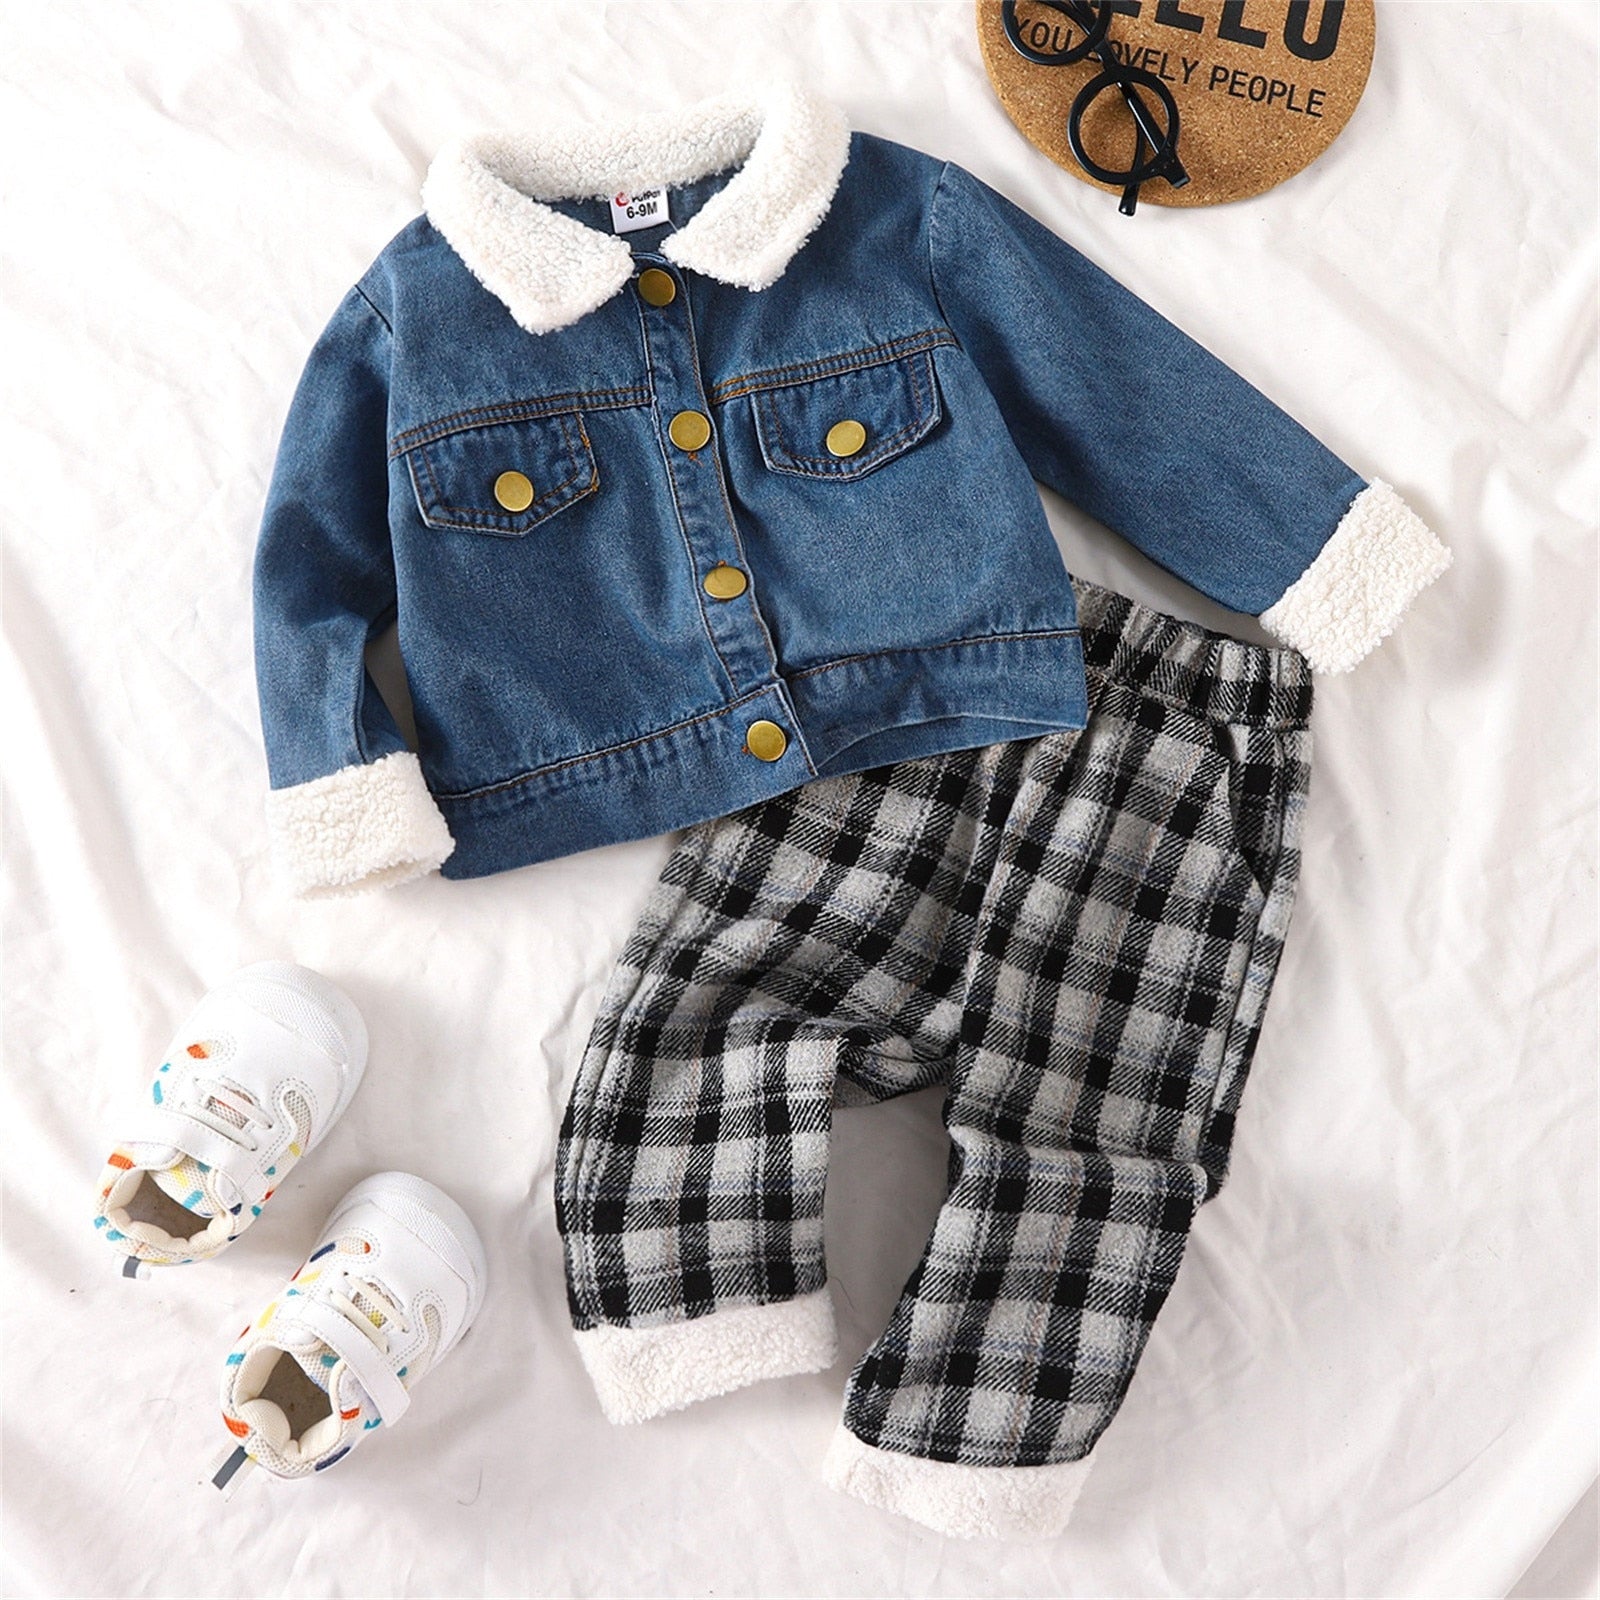 Infant Sweater set for Boys Shirt Jacket Plaid Patchwork Long Sleeve with Pant